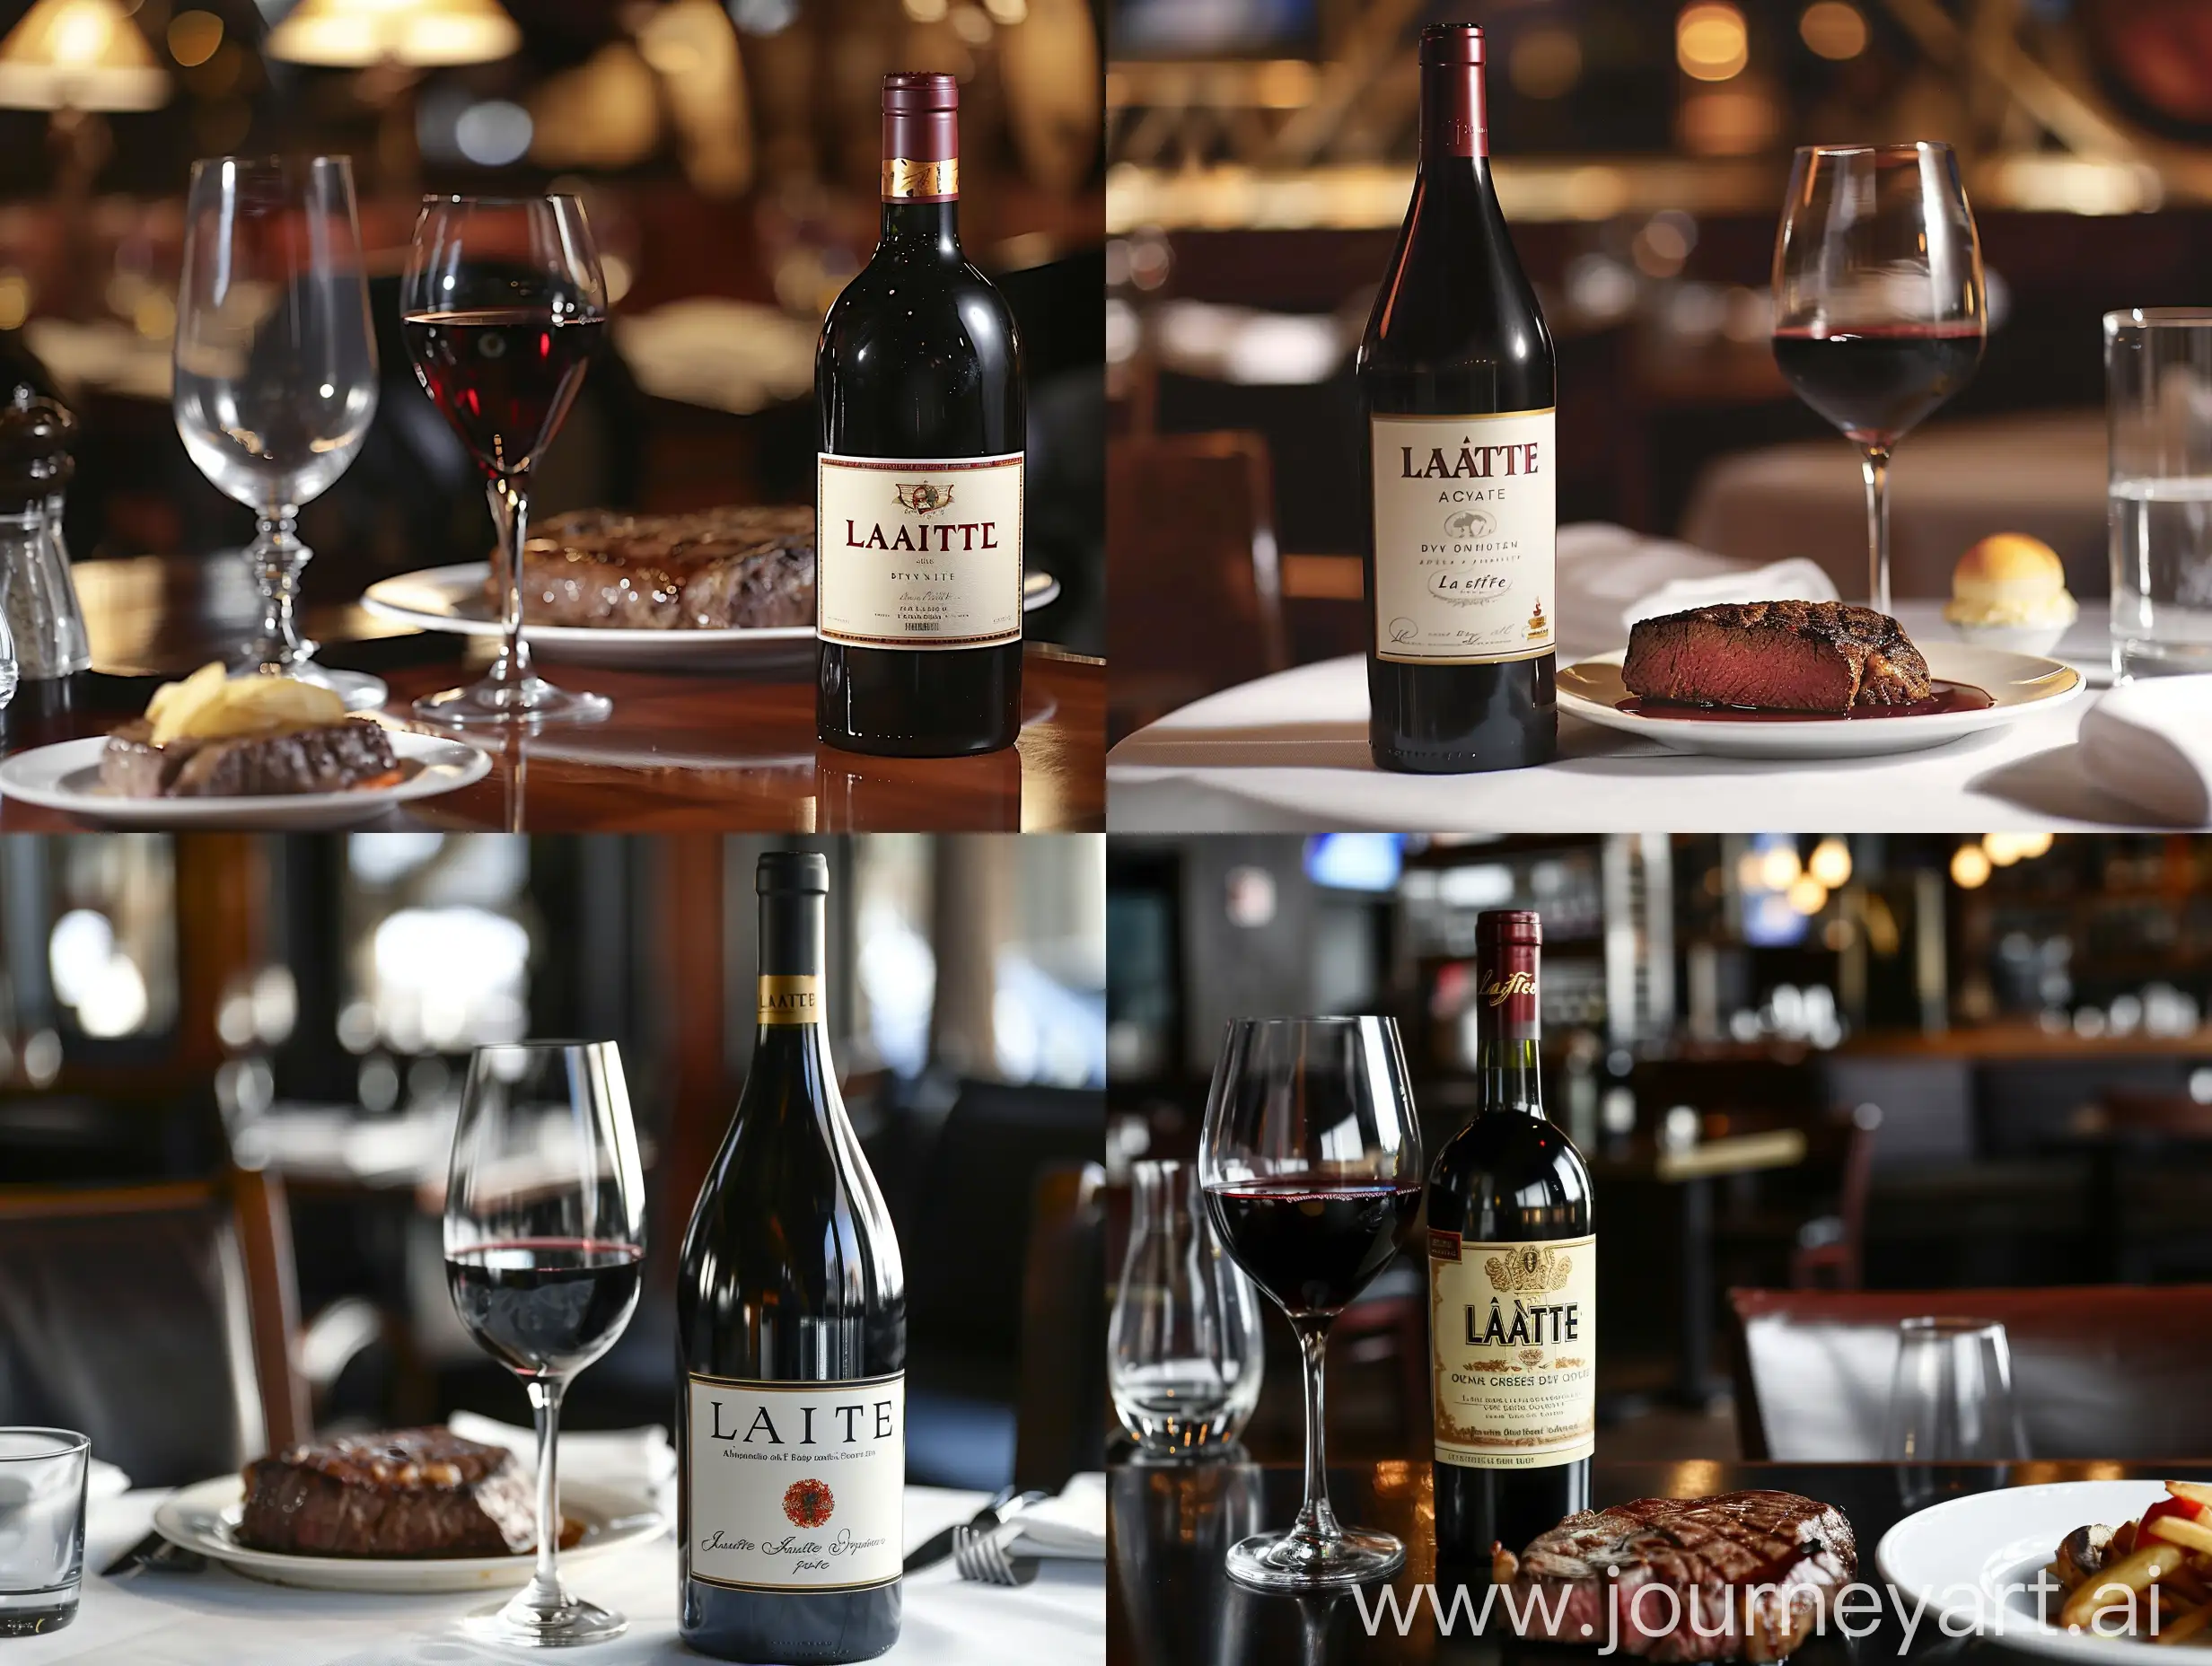 Fine-Dining-Lafite-Red-Wine-and-Fillet-Steak-in-an-Upscale-Restaurant